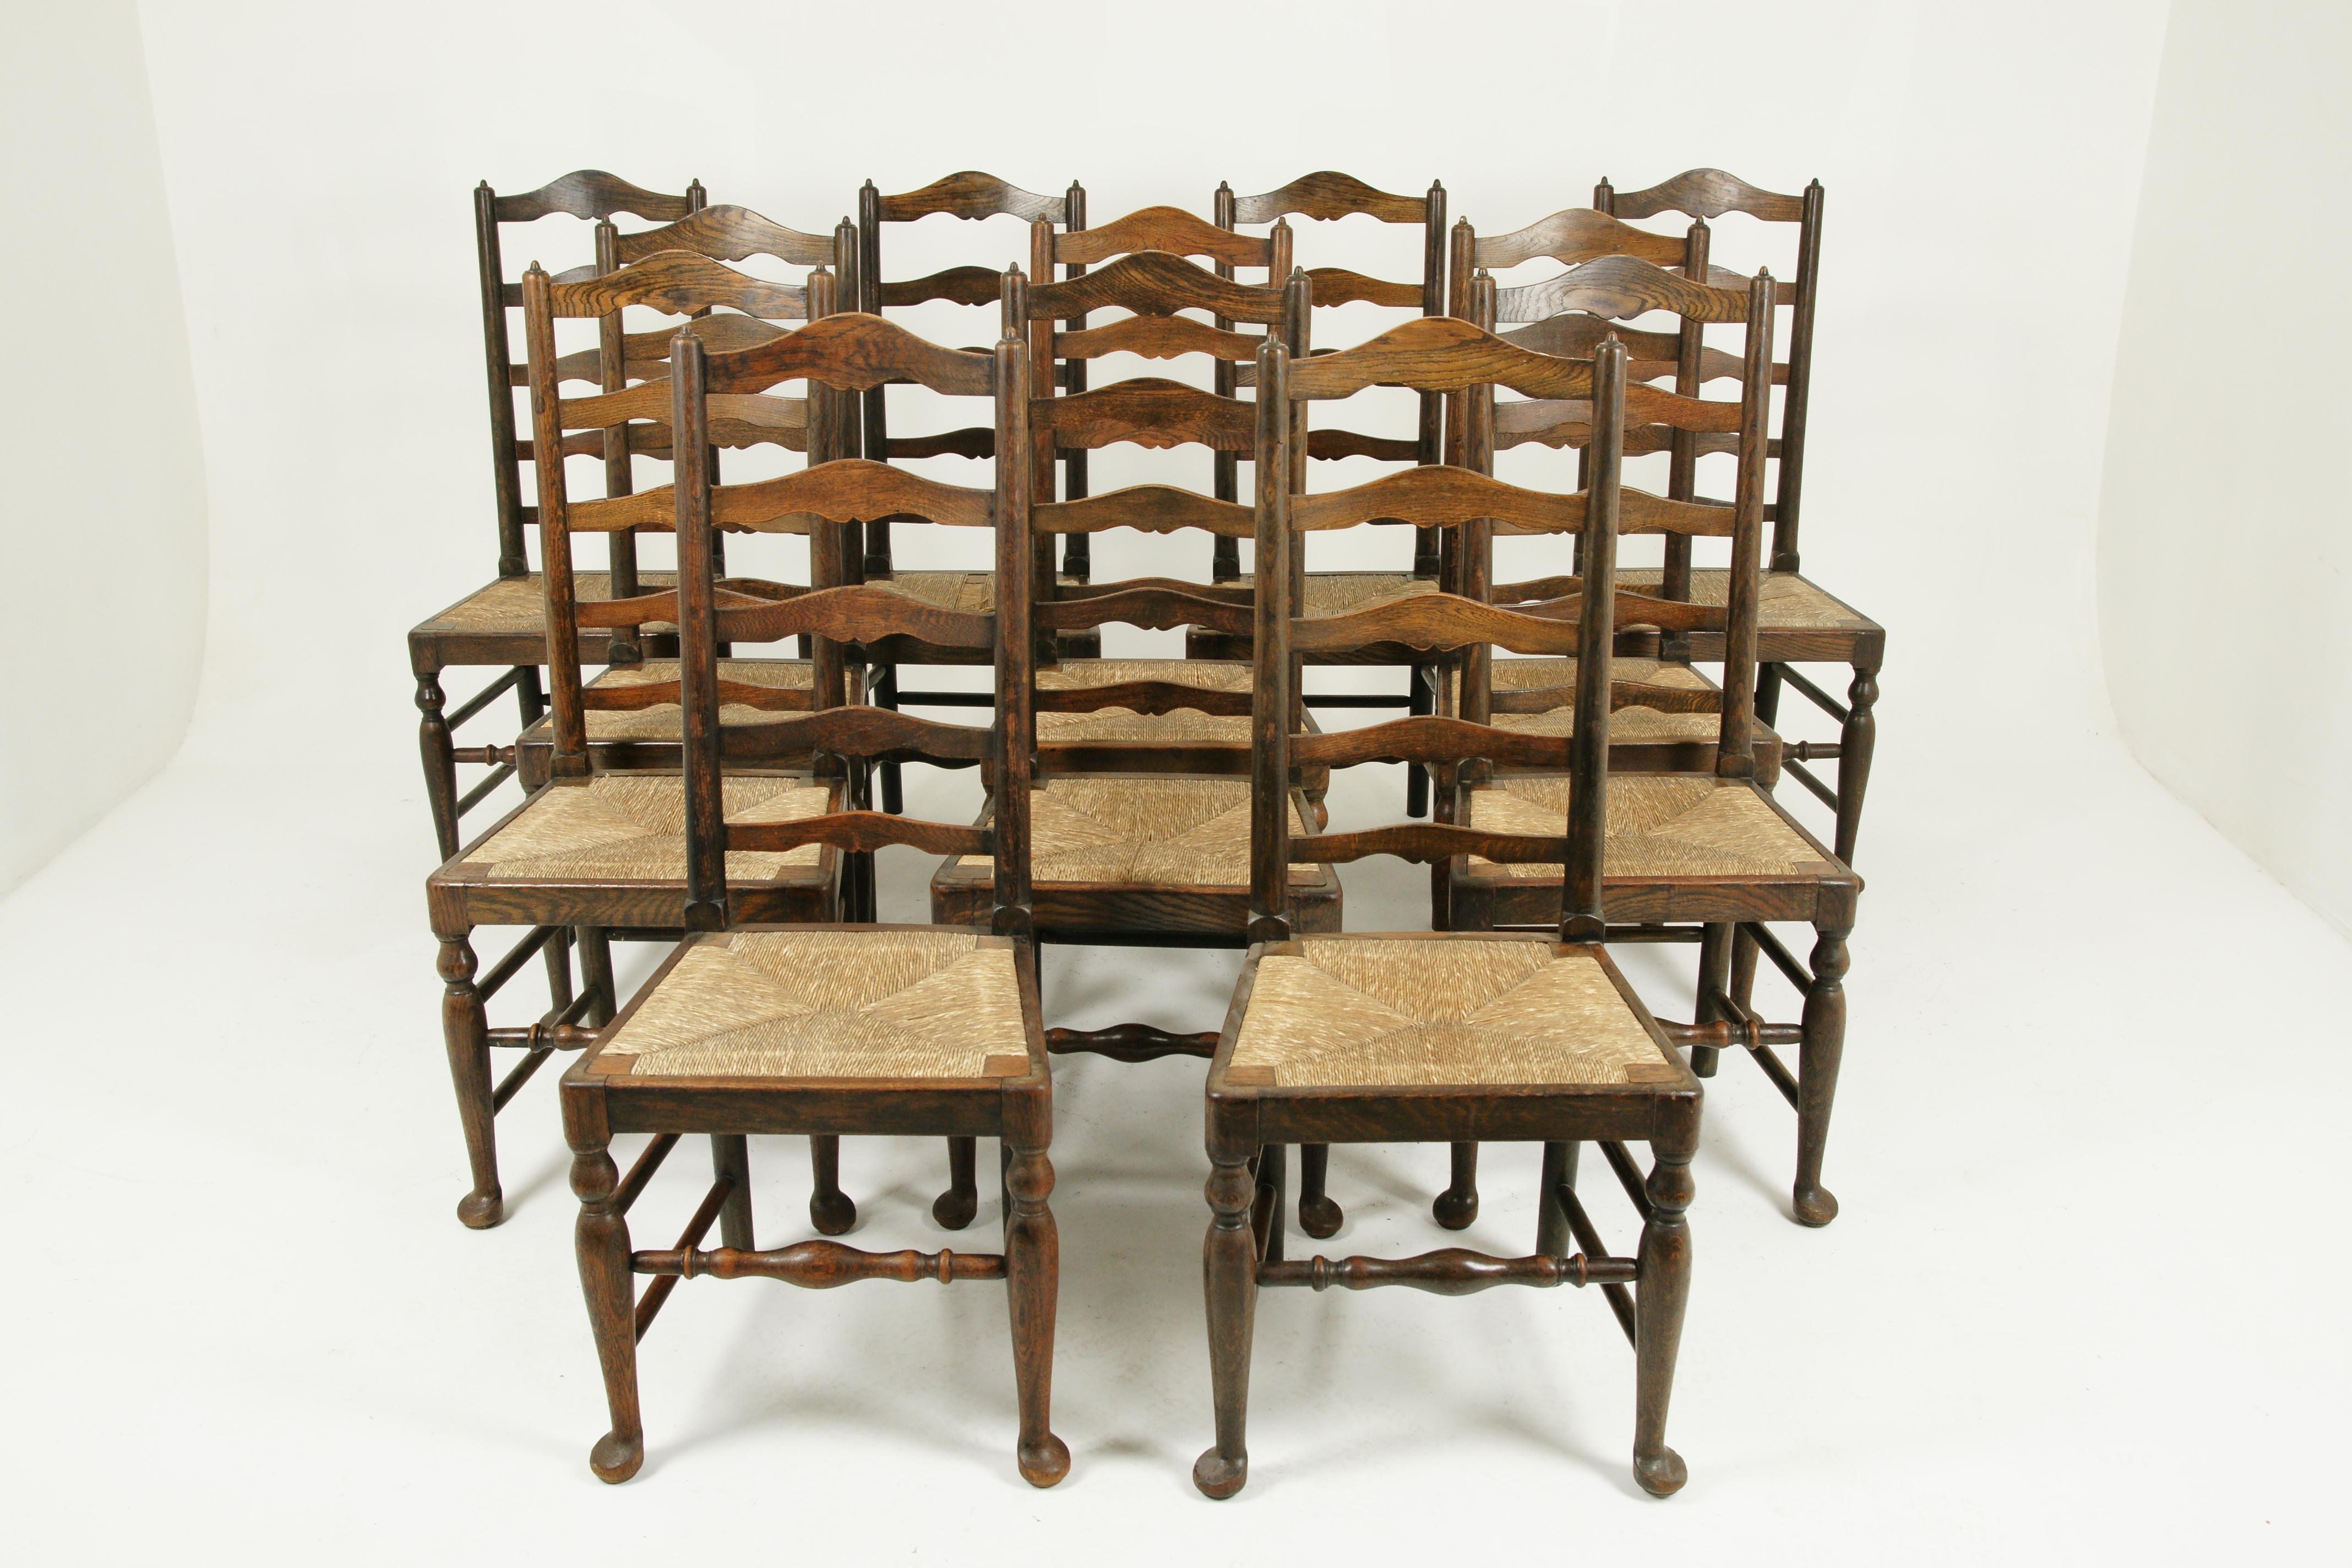 Rush seat chairs, set of 14 chairs, 12+2 chairs, 14 dining chairs, Country Kitchen, Scotland 1920, B1355

Scotland, 1920
Solid oak construction
Set of 14 ladder back rush seated chairs (including two king chairs)
Solid oak construction
Wavy